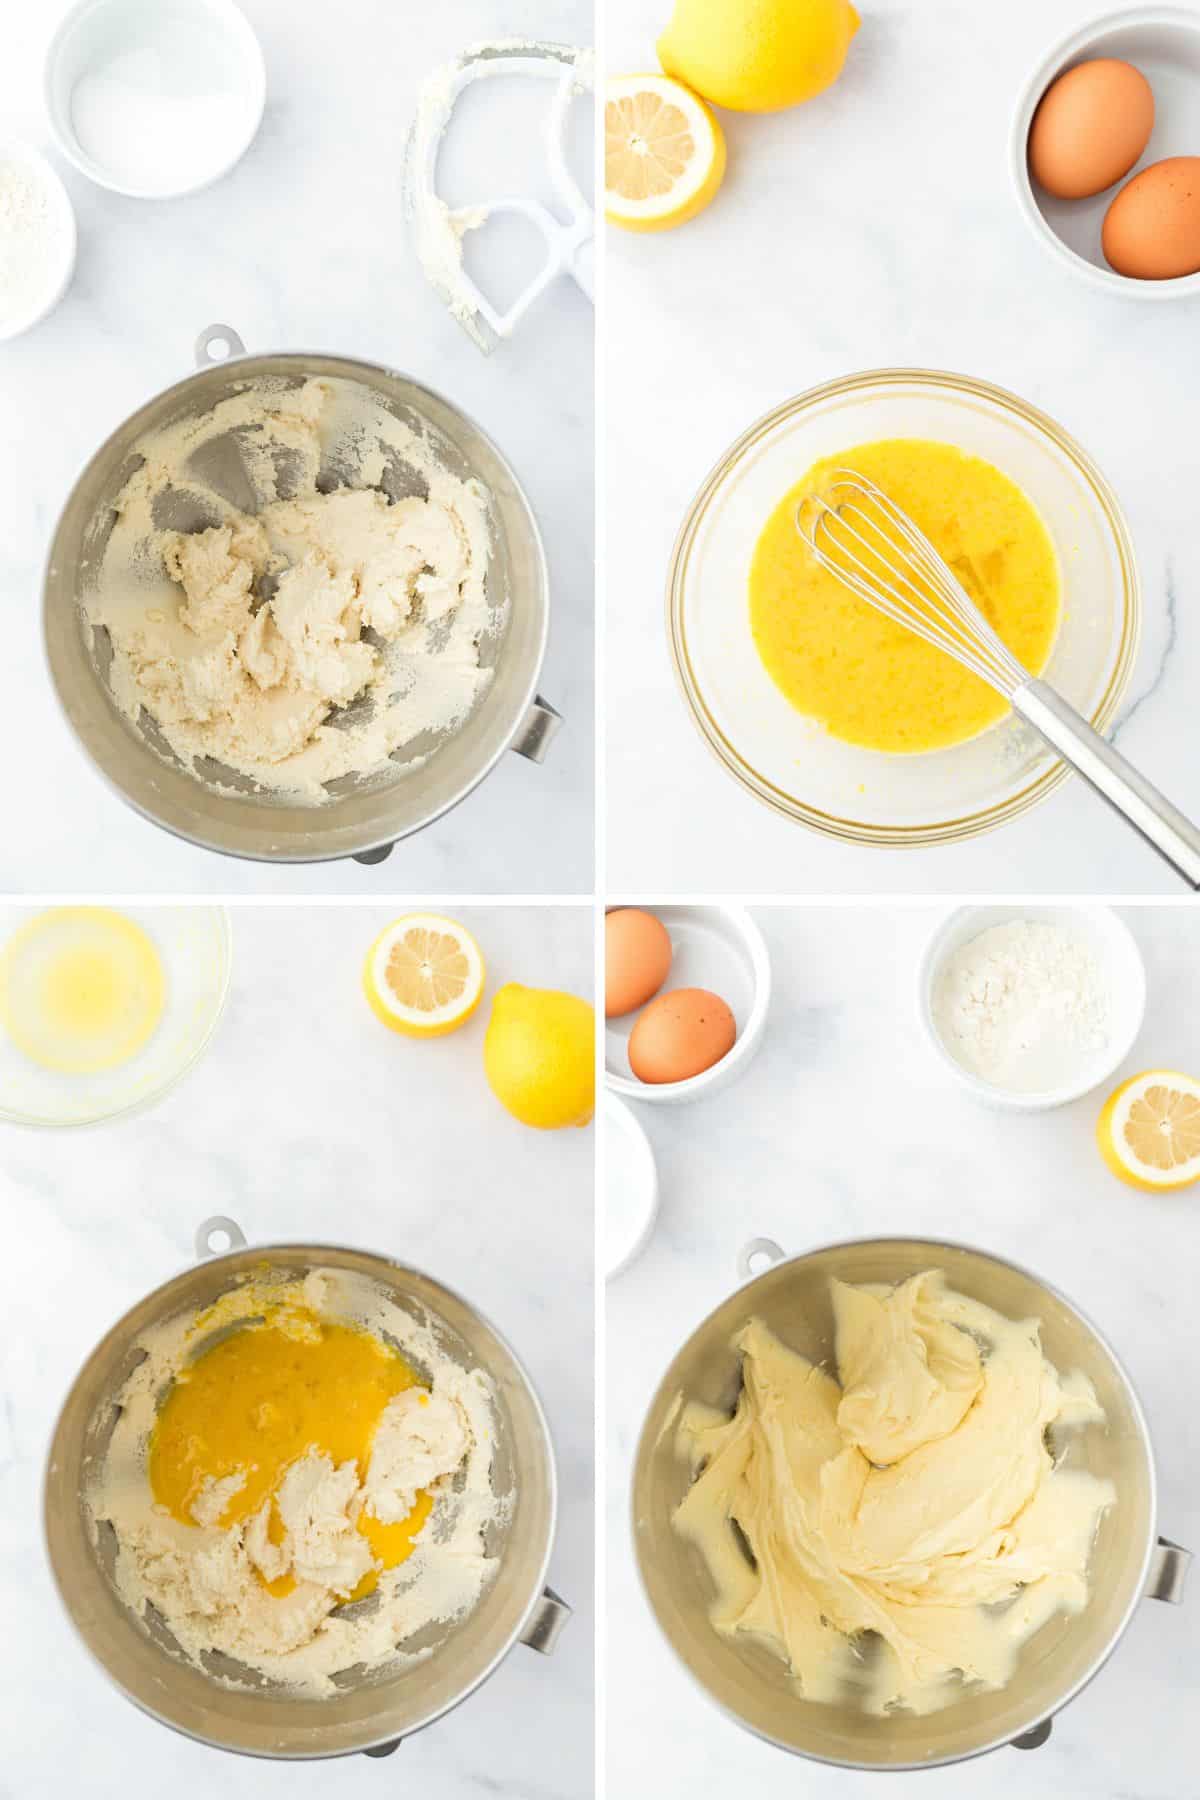 A collage showing the steps for mixing the lemon topping.